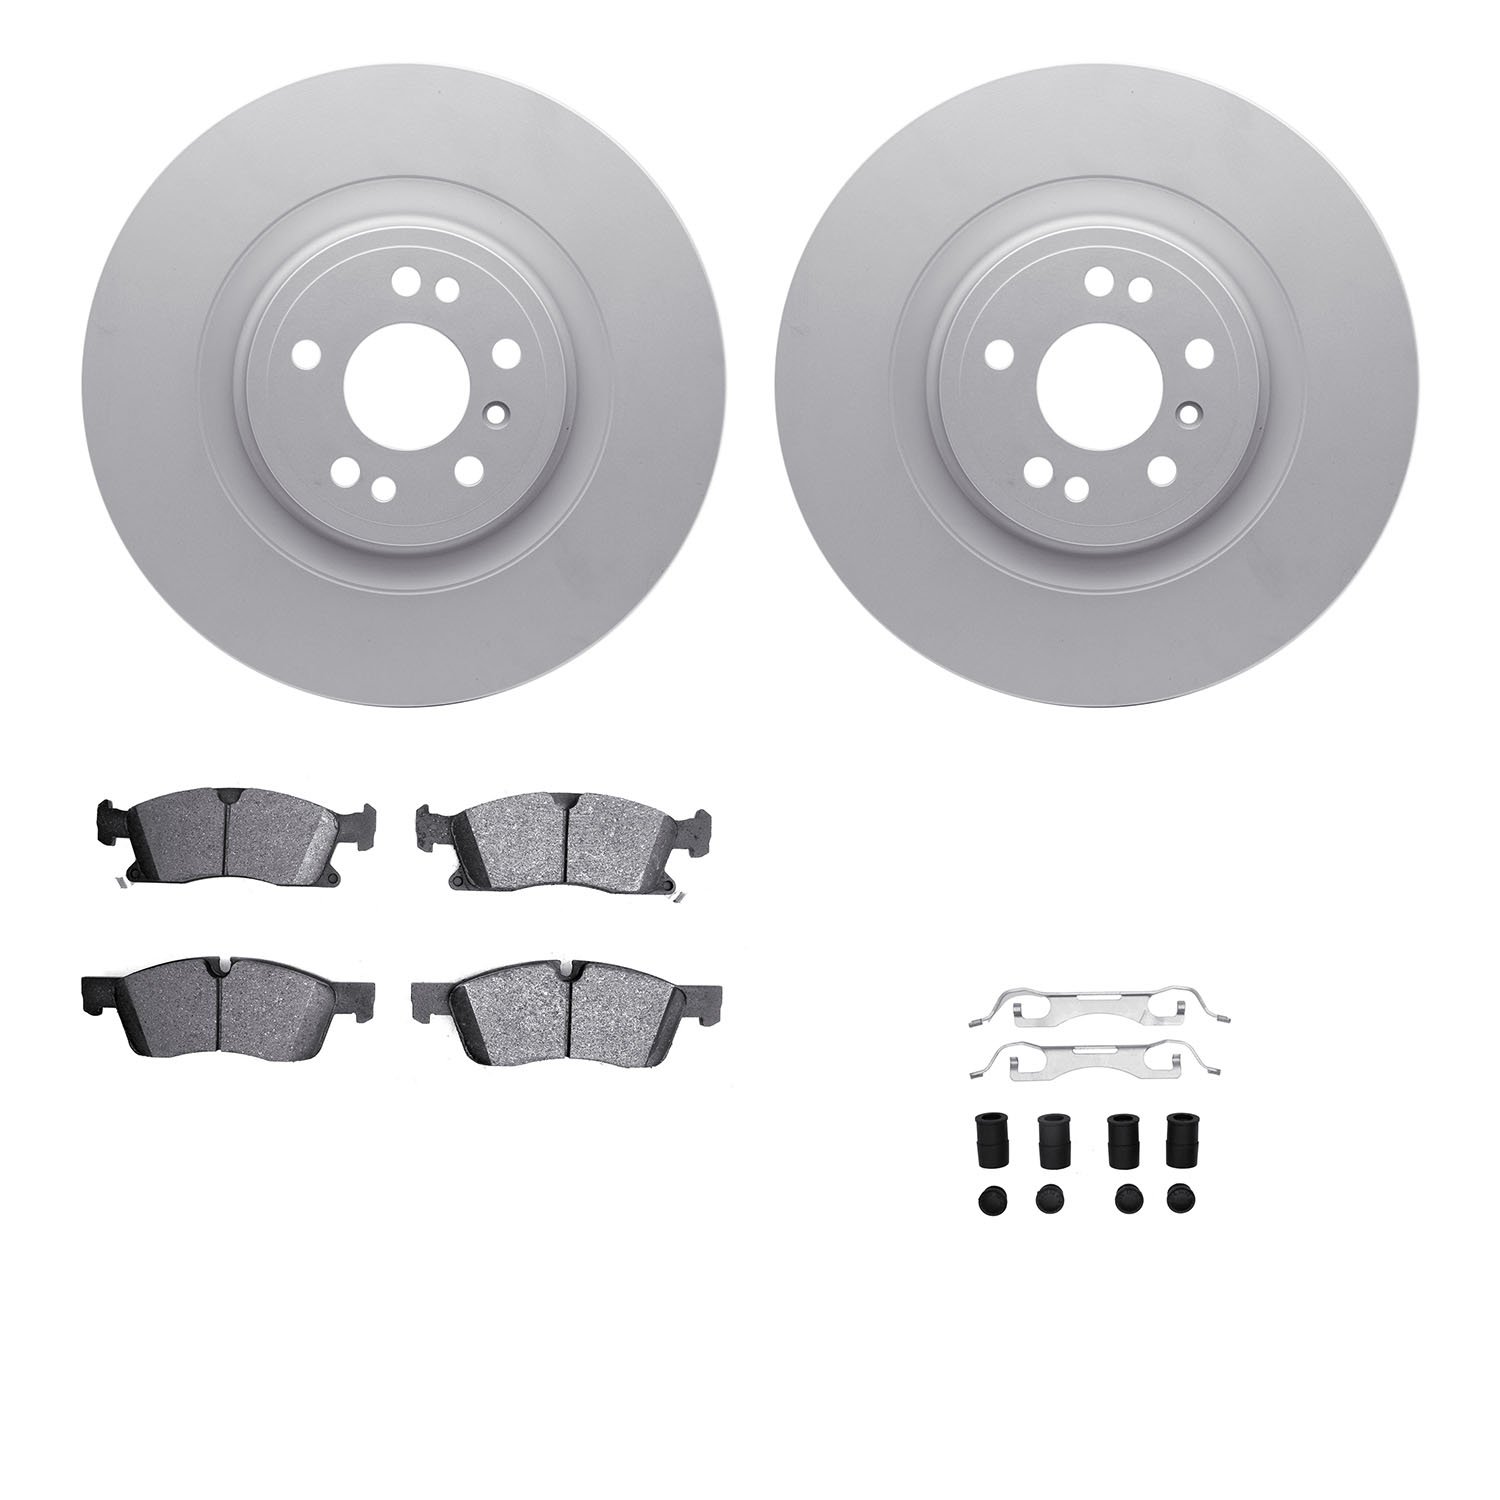 4412-63002 Geospec Brake Rotors with Ultimate-Duty Brake Pads & Hardware, 2013-2019 Mercedes-Benz, Position: Front